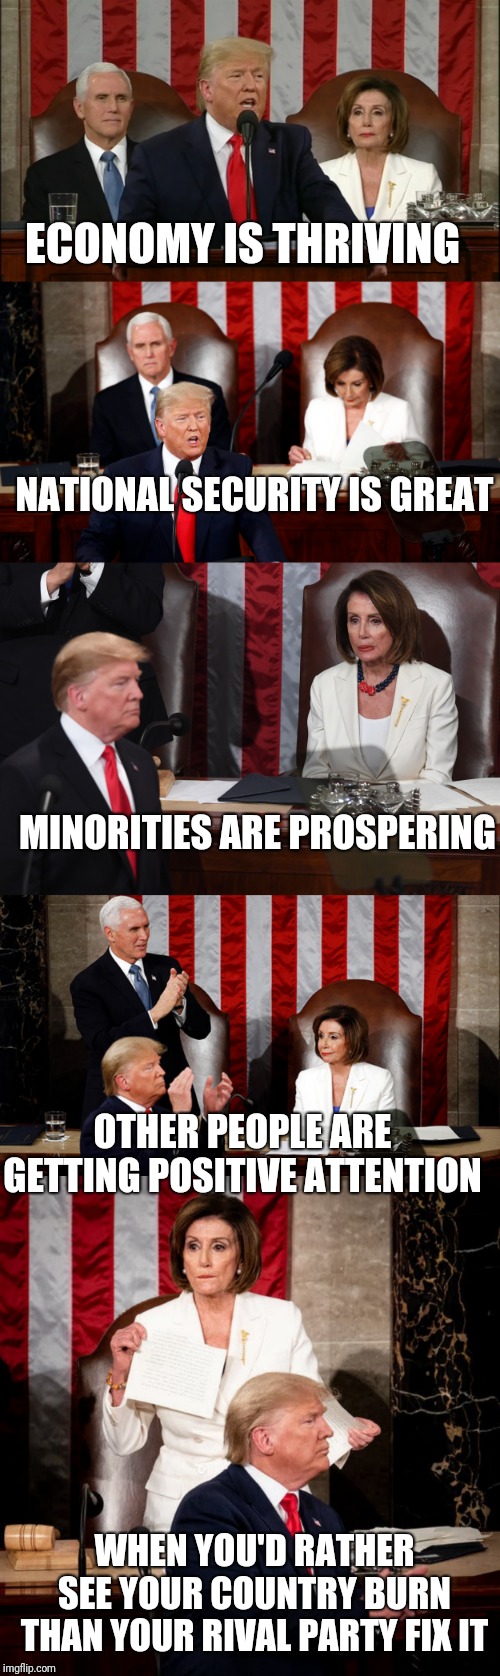 She could have accomplished so much if she had laid aside her pride and worked with him. | ECONOMY IS THRIVING; NATIONAL SECURITY IS GREAT; MINORITIES ARE PROSPERING; OTHER PEOPLE ARE GETTING POSITIVE ATTENTION; WHEN YOU'D RATHER SEE YOUR COUNTRY BURN THAN YOUR RIVAL PARTY FIX IT | image tagged in sotu,2020,trump,pelosi | made w/ Imgflip meme maker